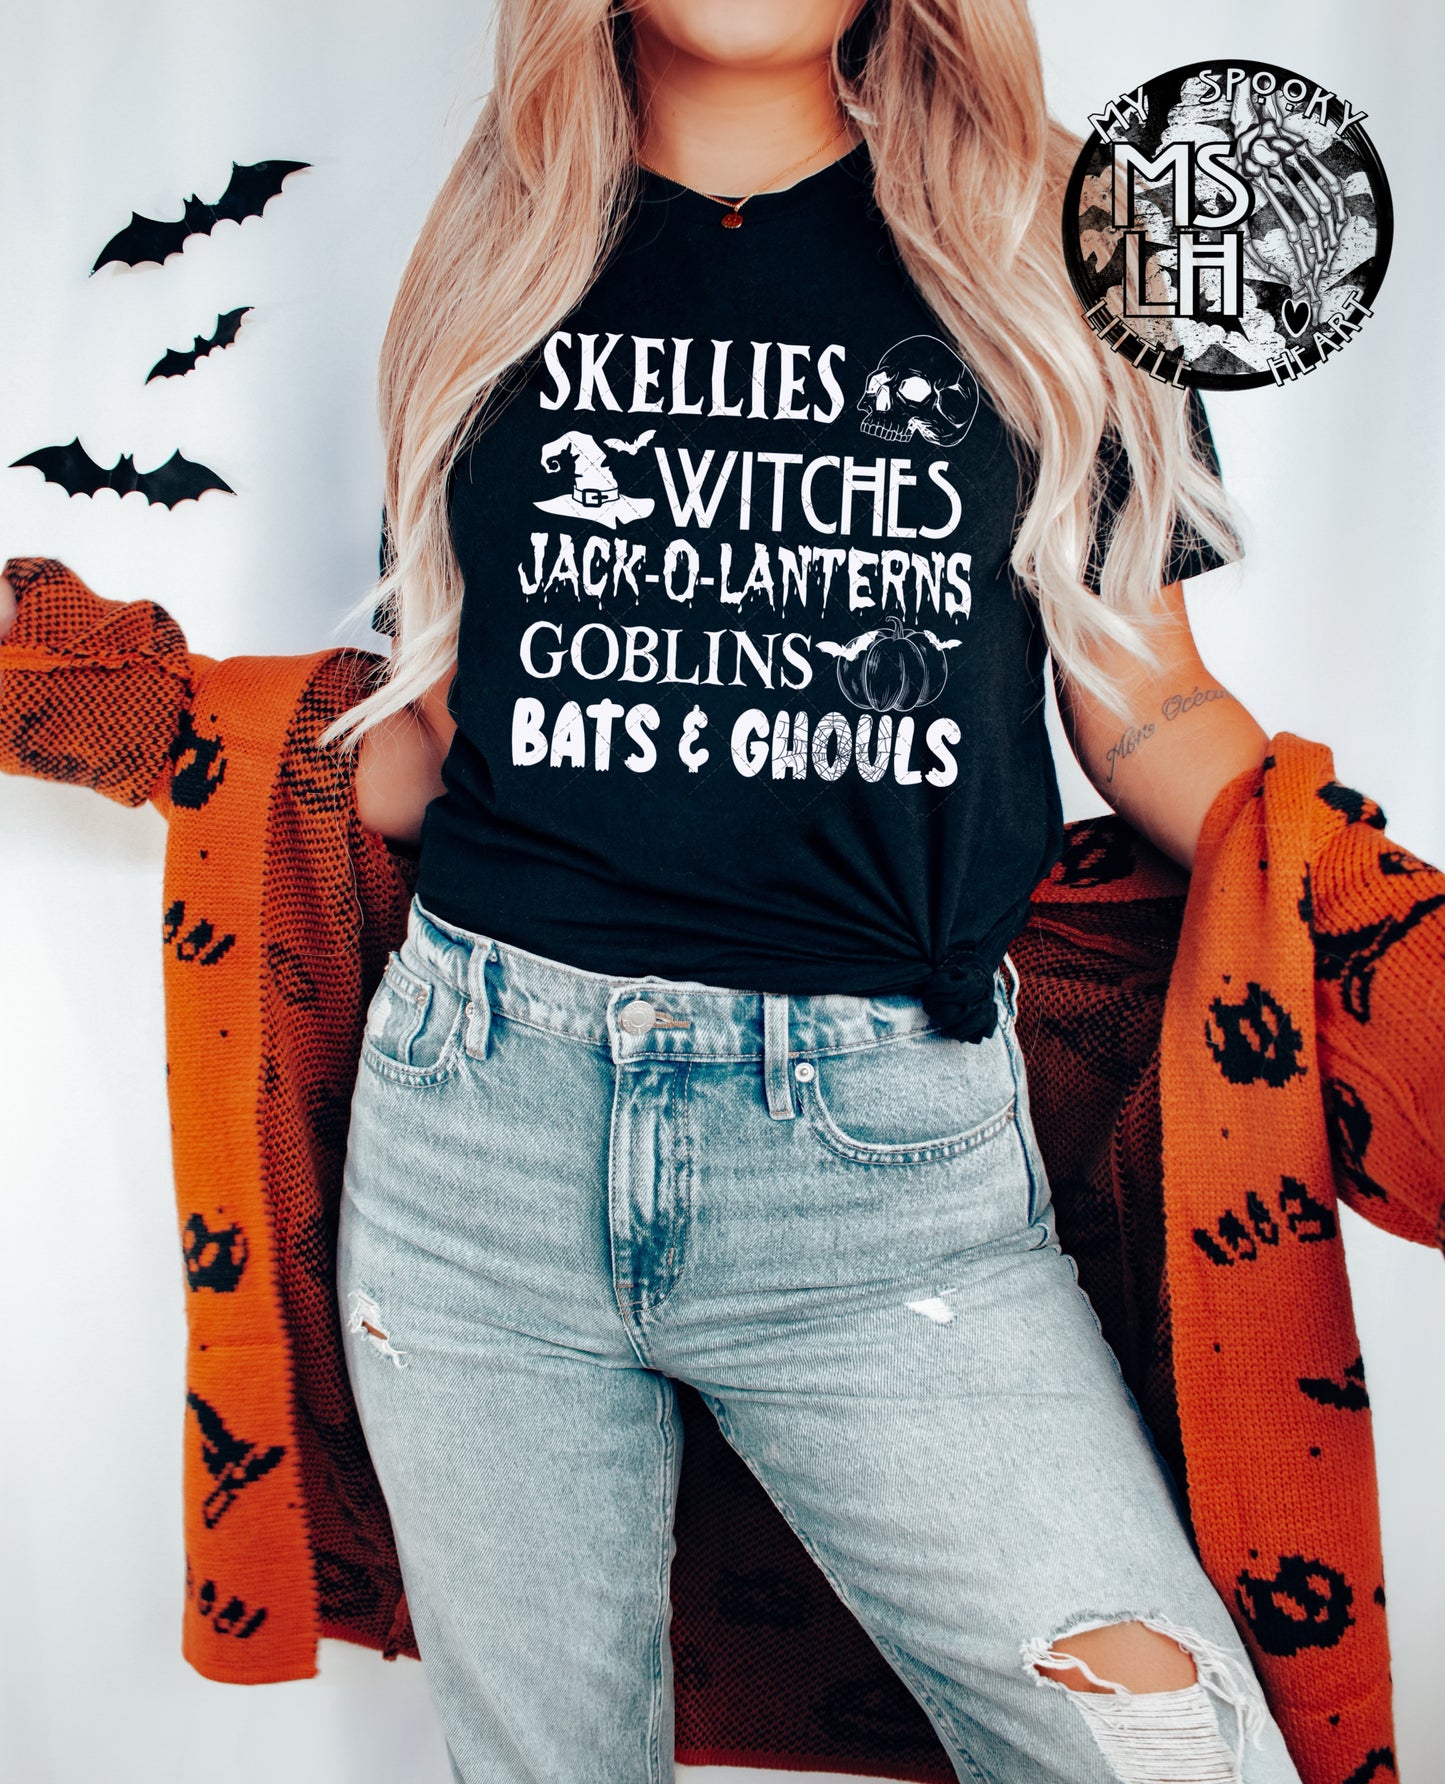 Halloween, Skellies Witches, Jack -o Lanterns, Goblins, Bats & Ghouls